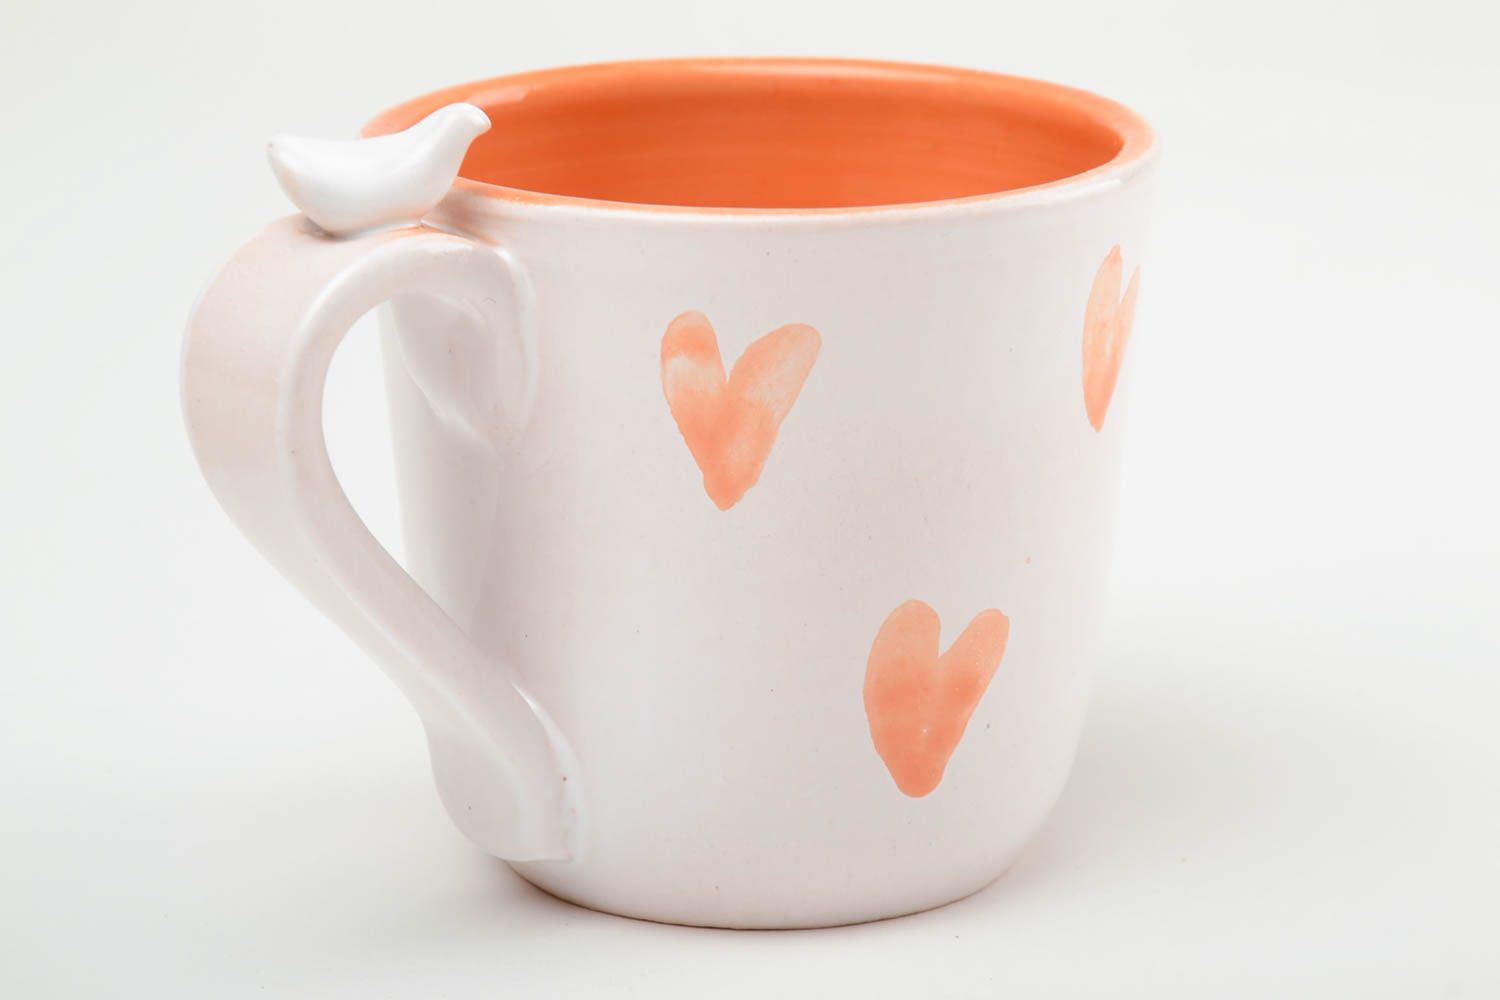 11 oz art ceramic white and orange cup with handle and hearts pattern photo 4